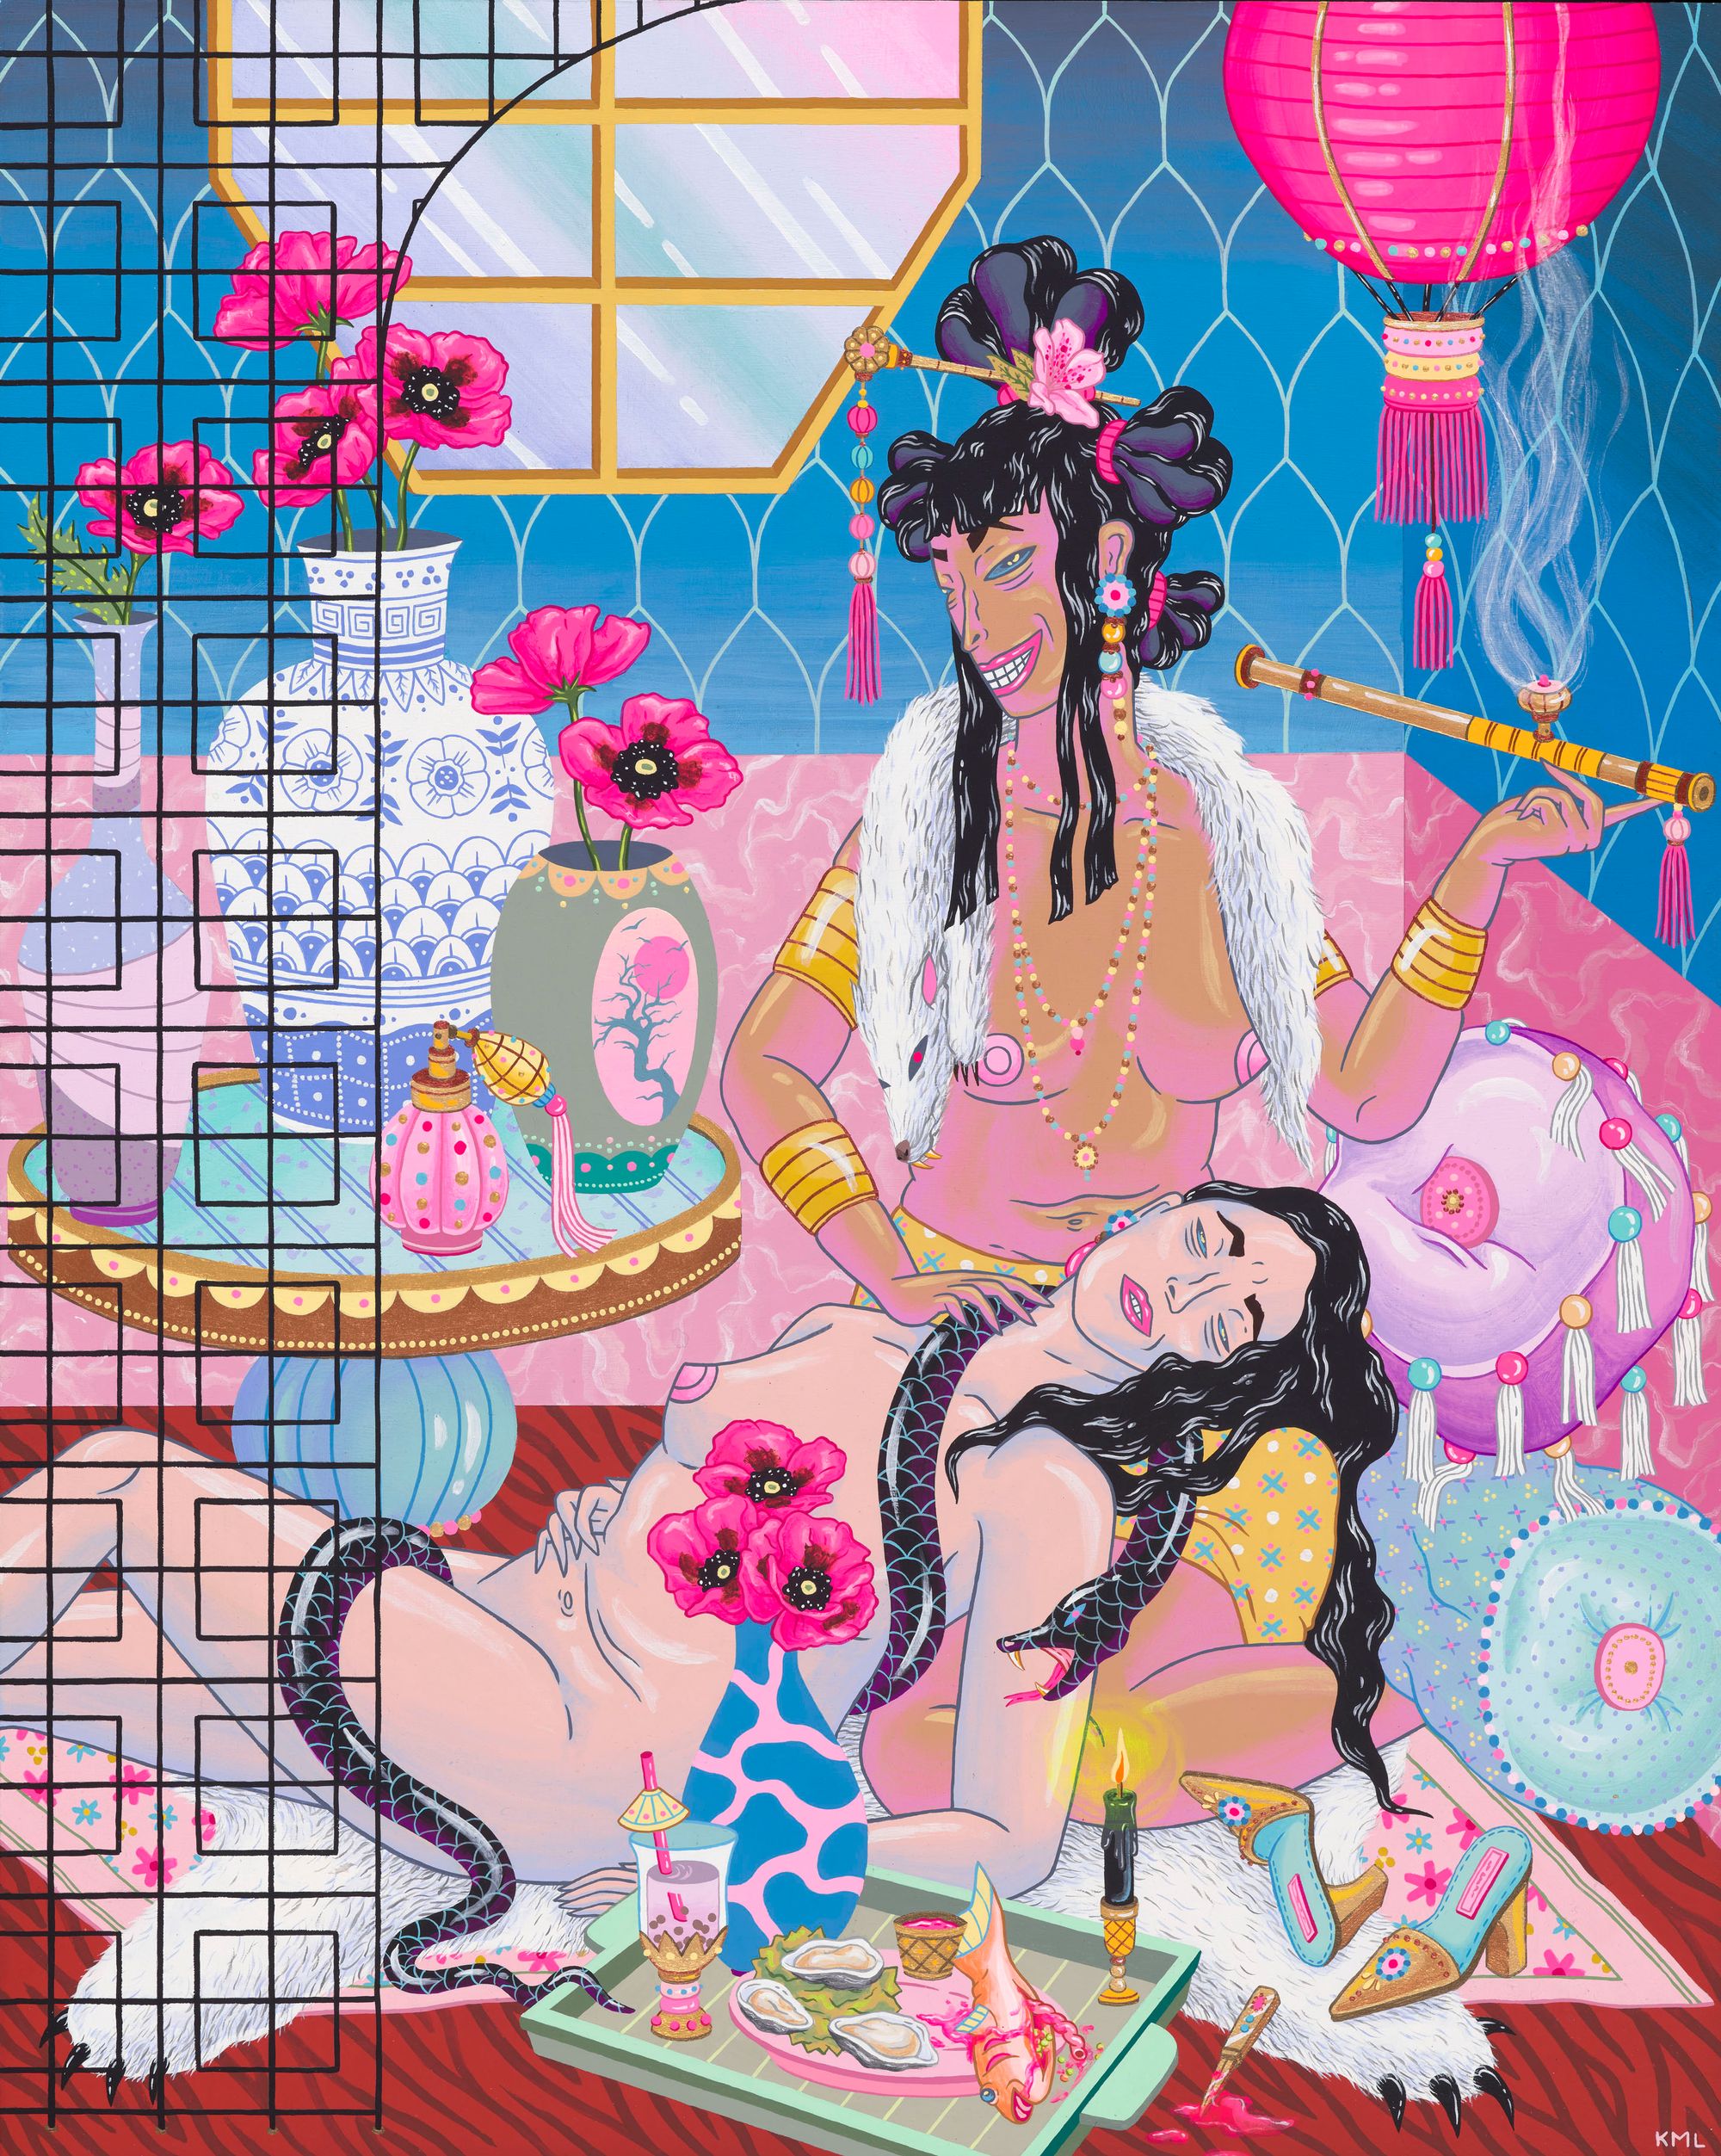 Kristen Liu-Wong's painting called We Dreamt Of Poppies depicts two nude women lounging in an opium den with a tiger rug, floor pillows, vases filled with pink flowers, and a hot pink lantern.